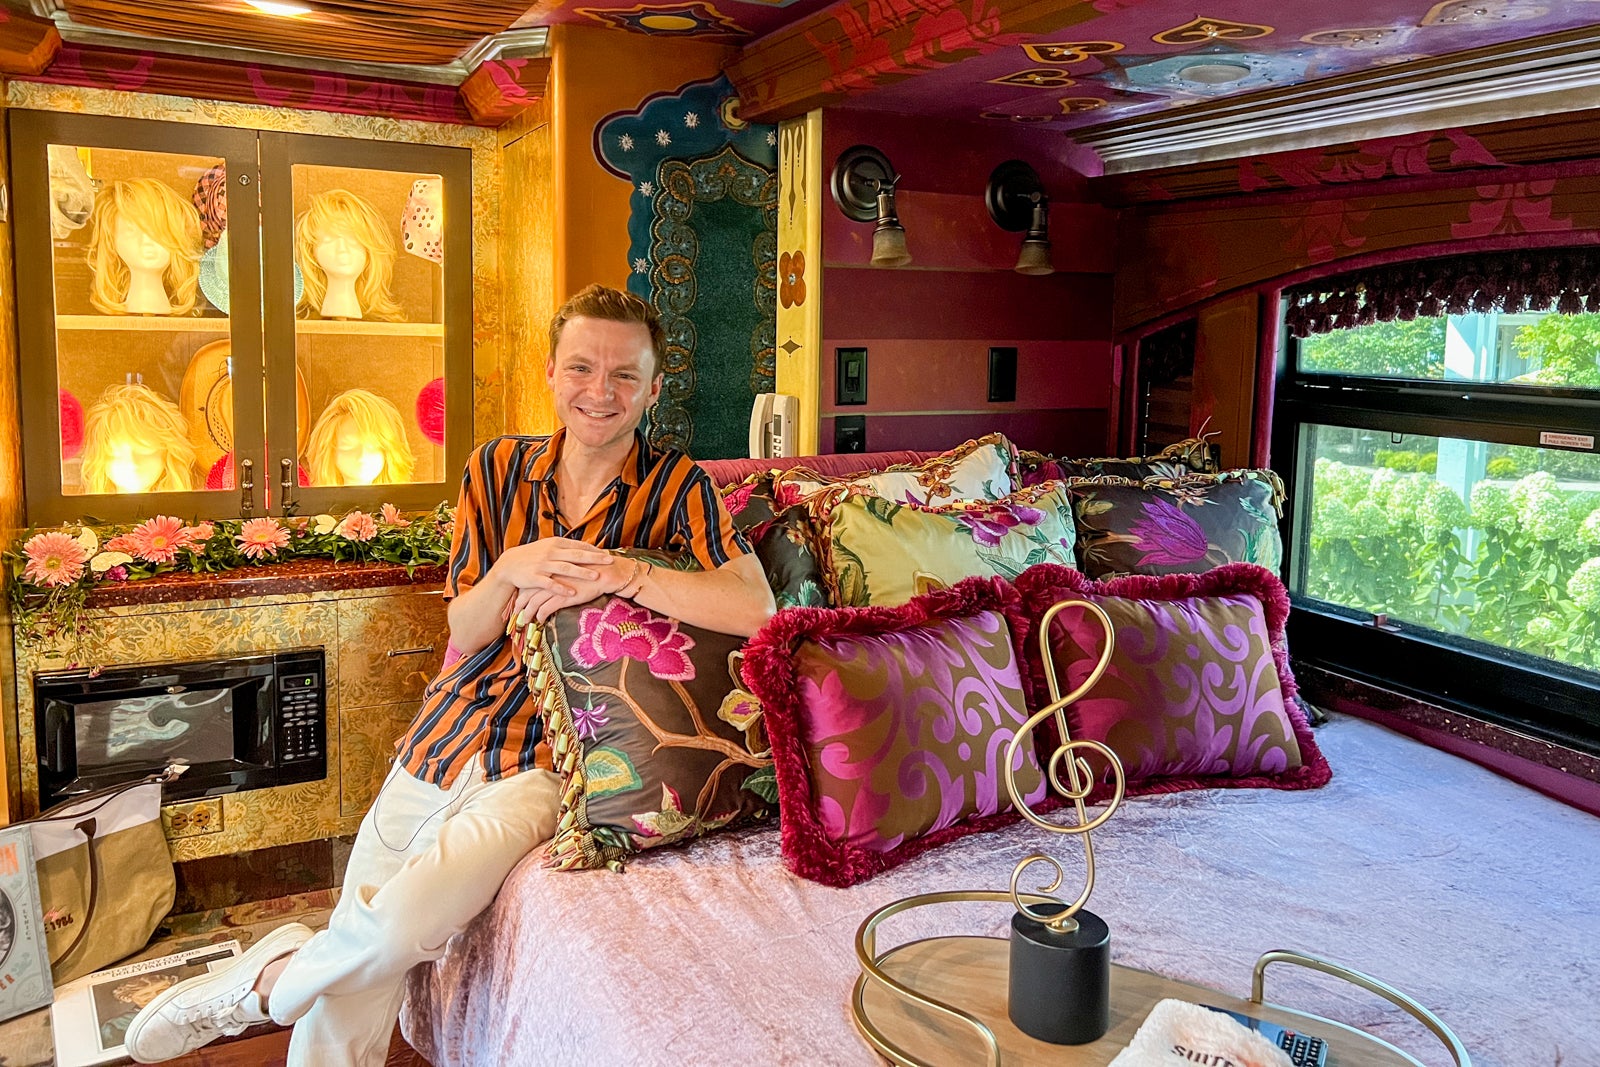 tanner in Dolly Parton's tour bus